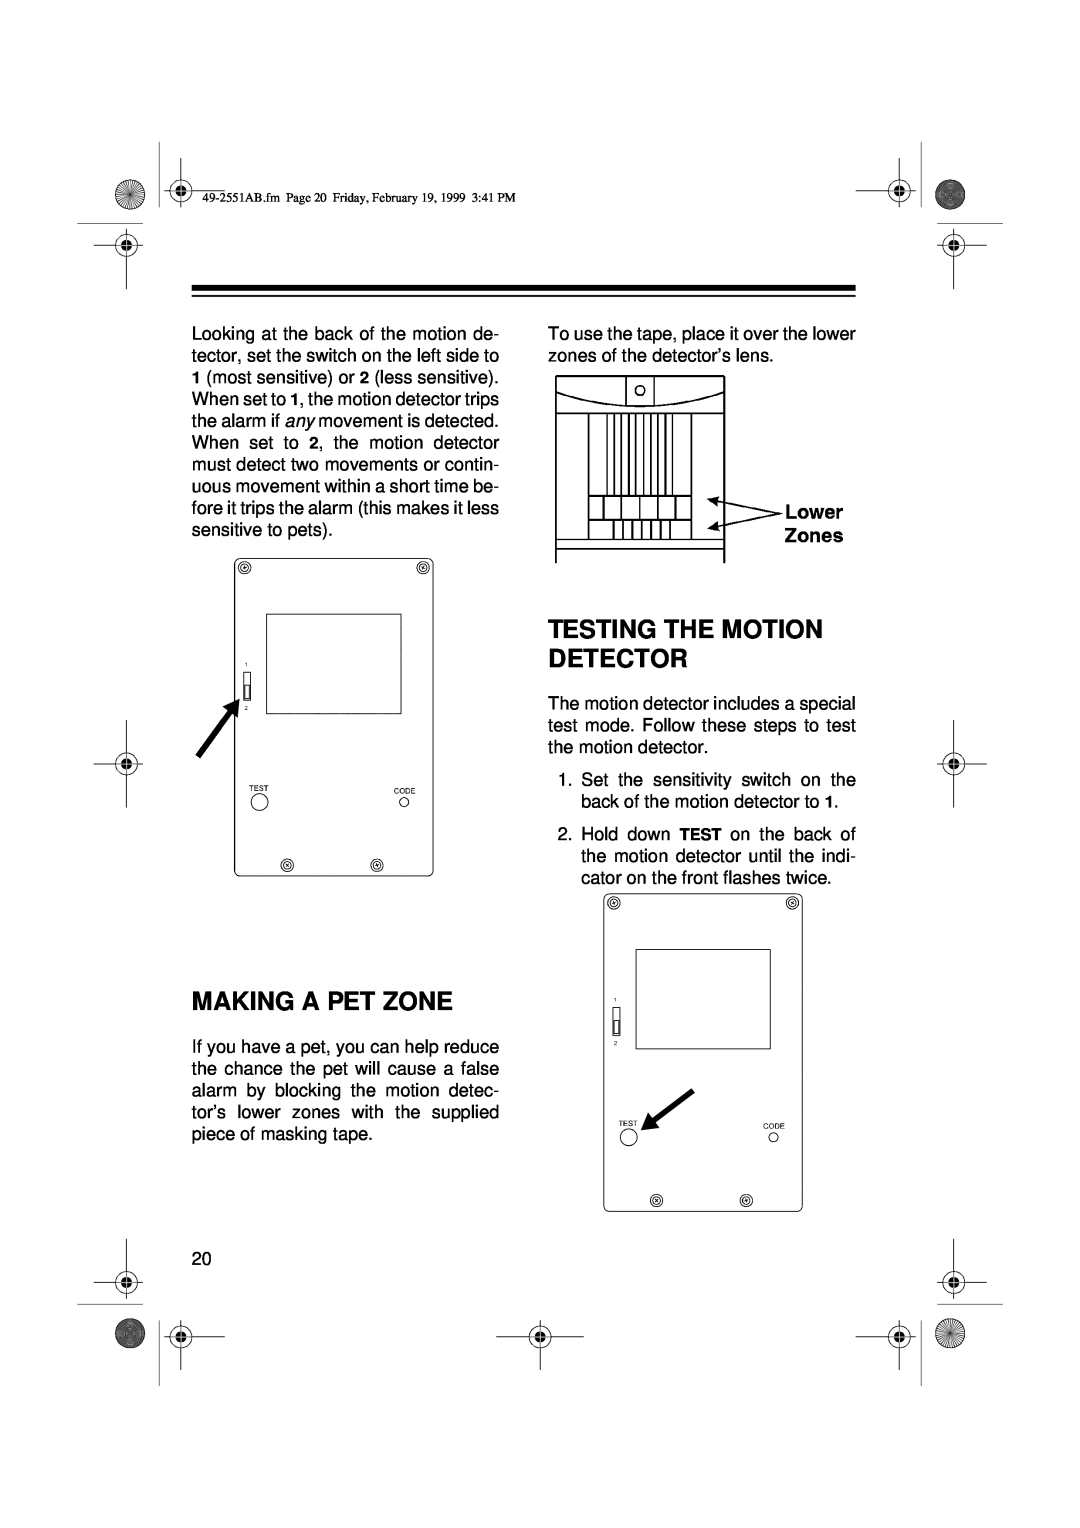 Radio Shack 49-2551A owner manual Testing The Motion Detector, Making A Pet Zone 